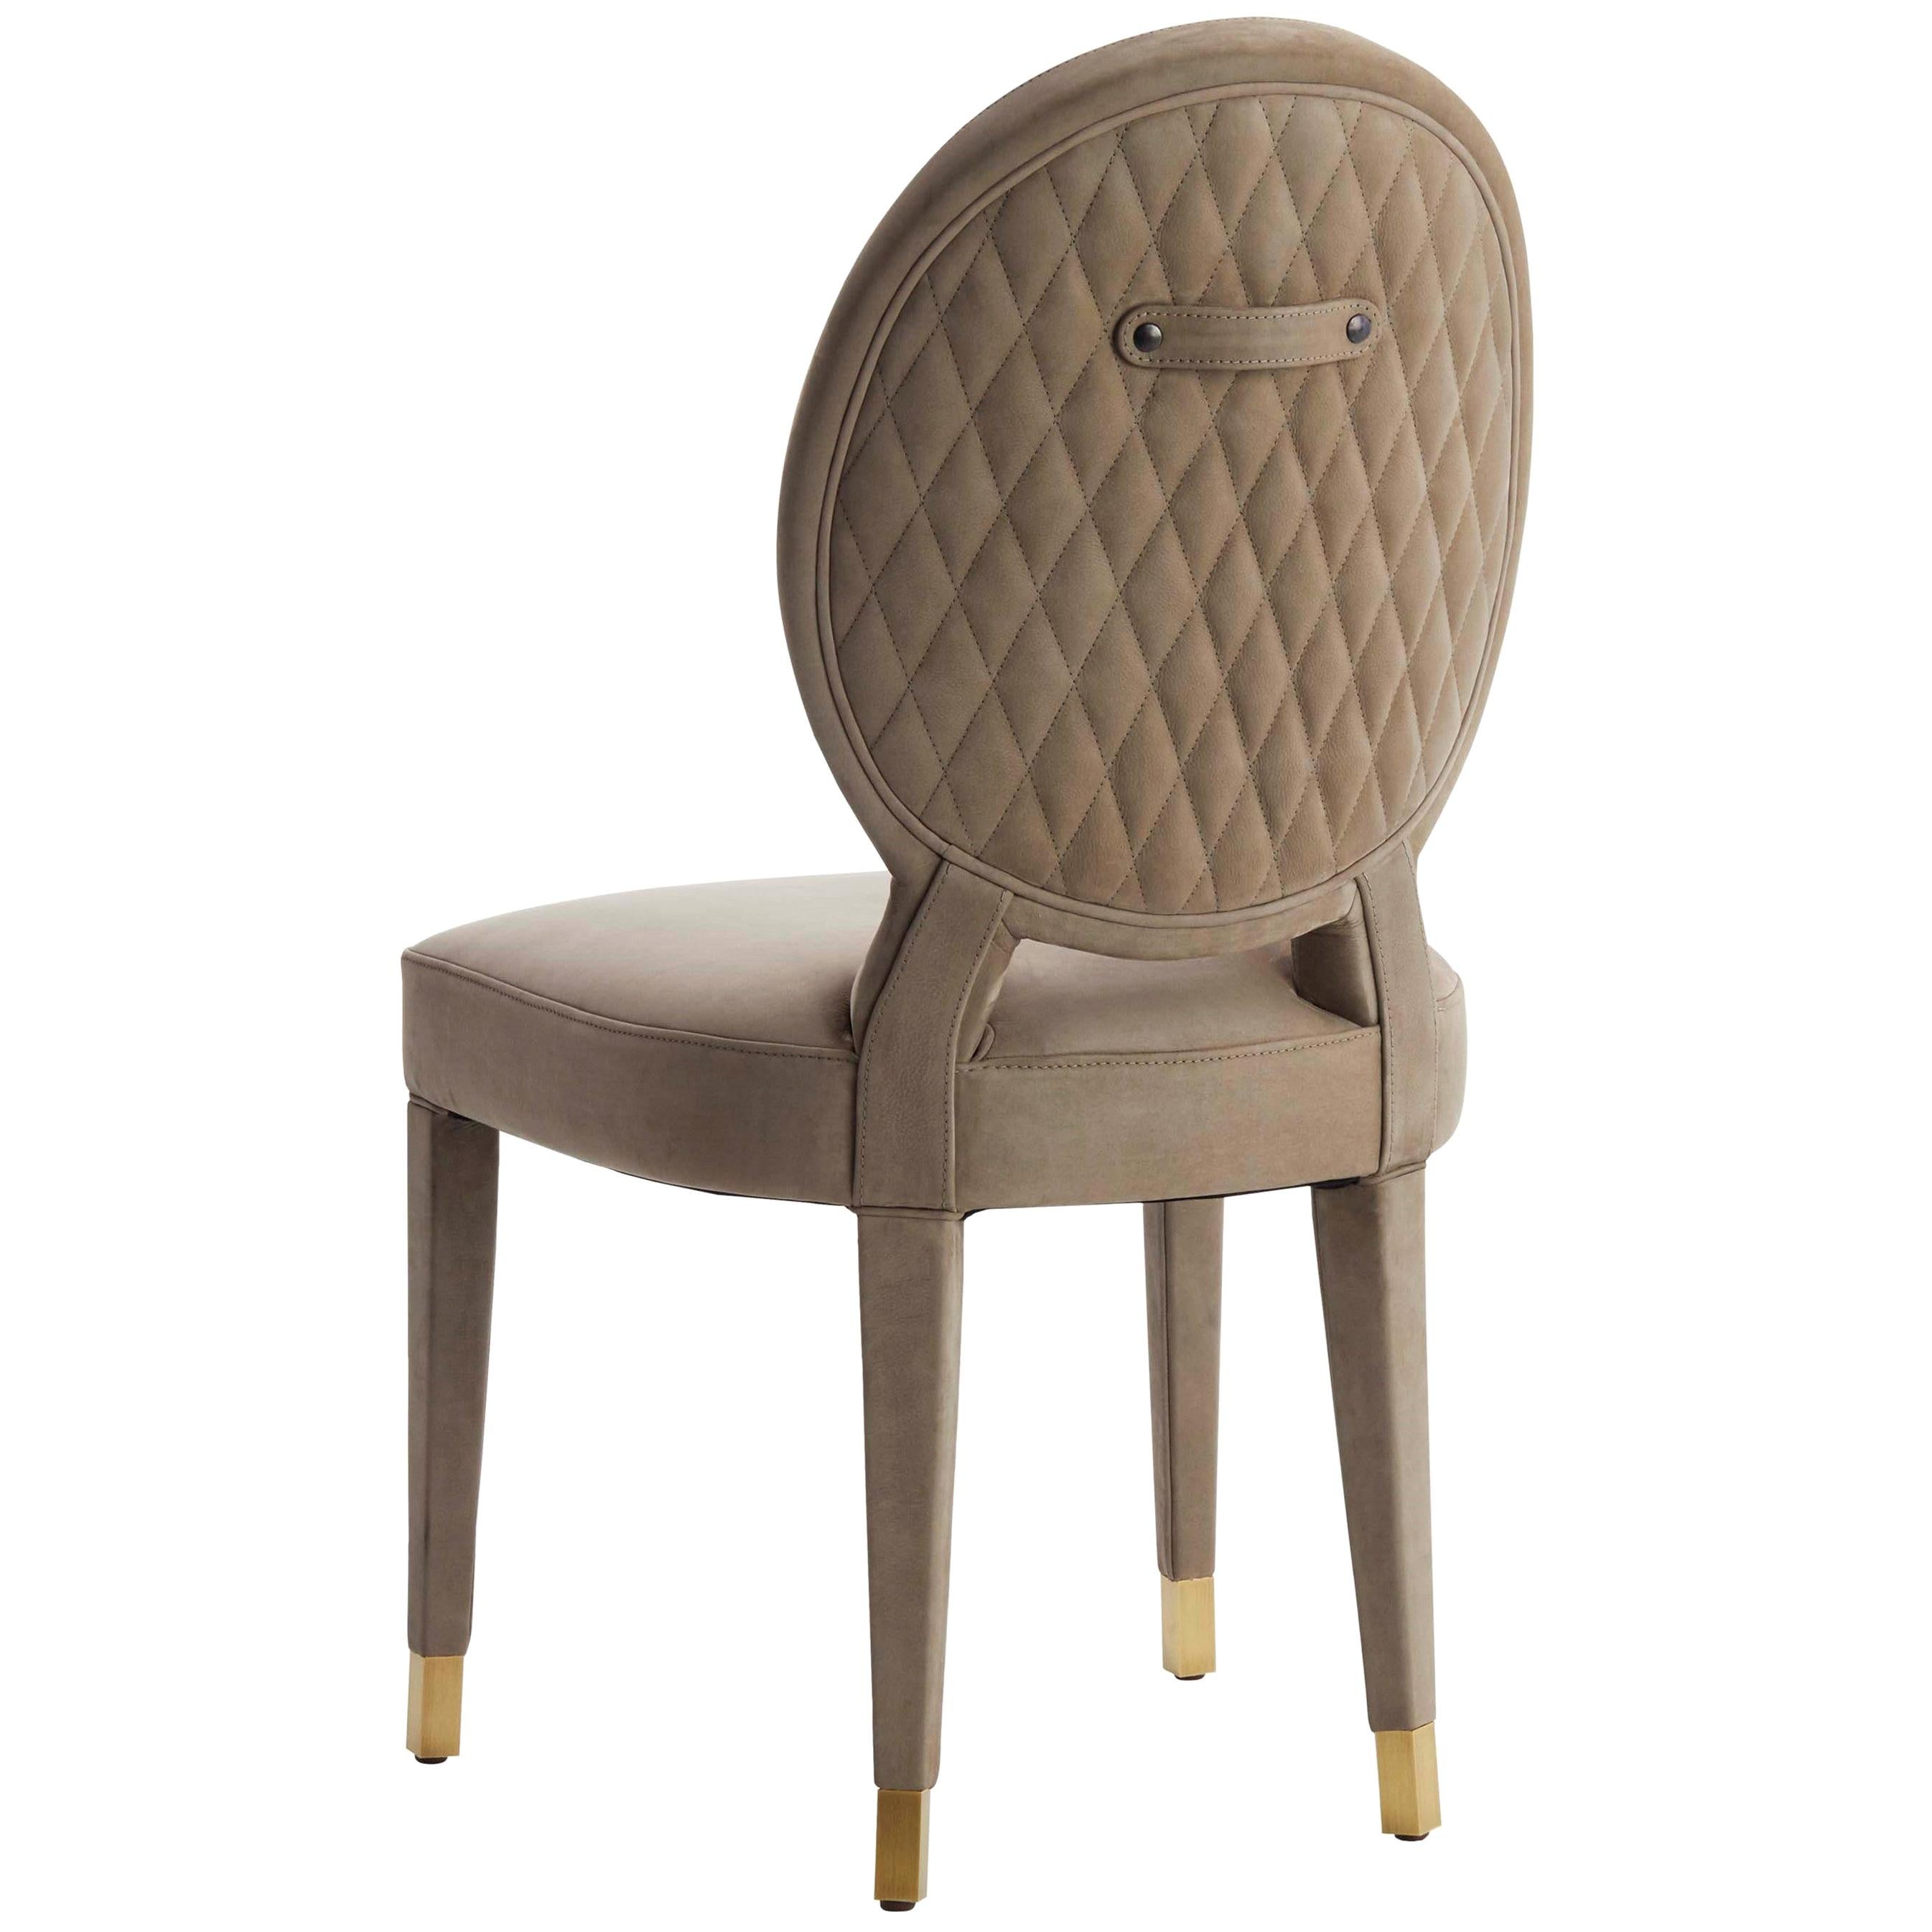 AUREA dining chair in Natural Leather For Sale